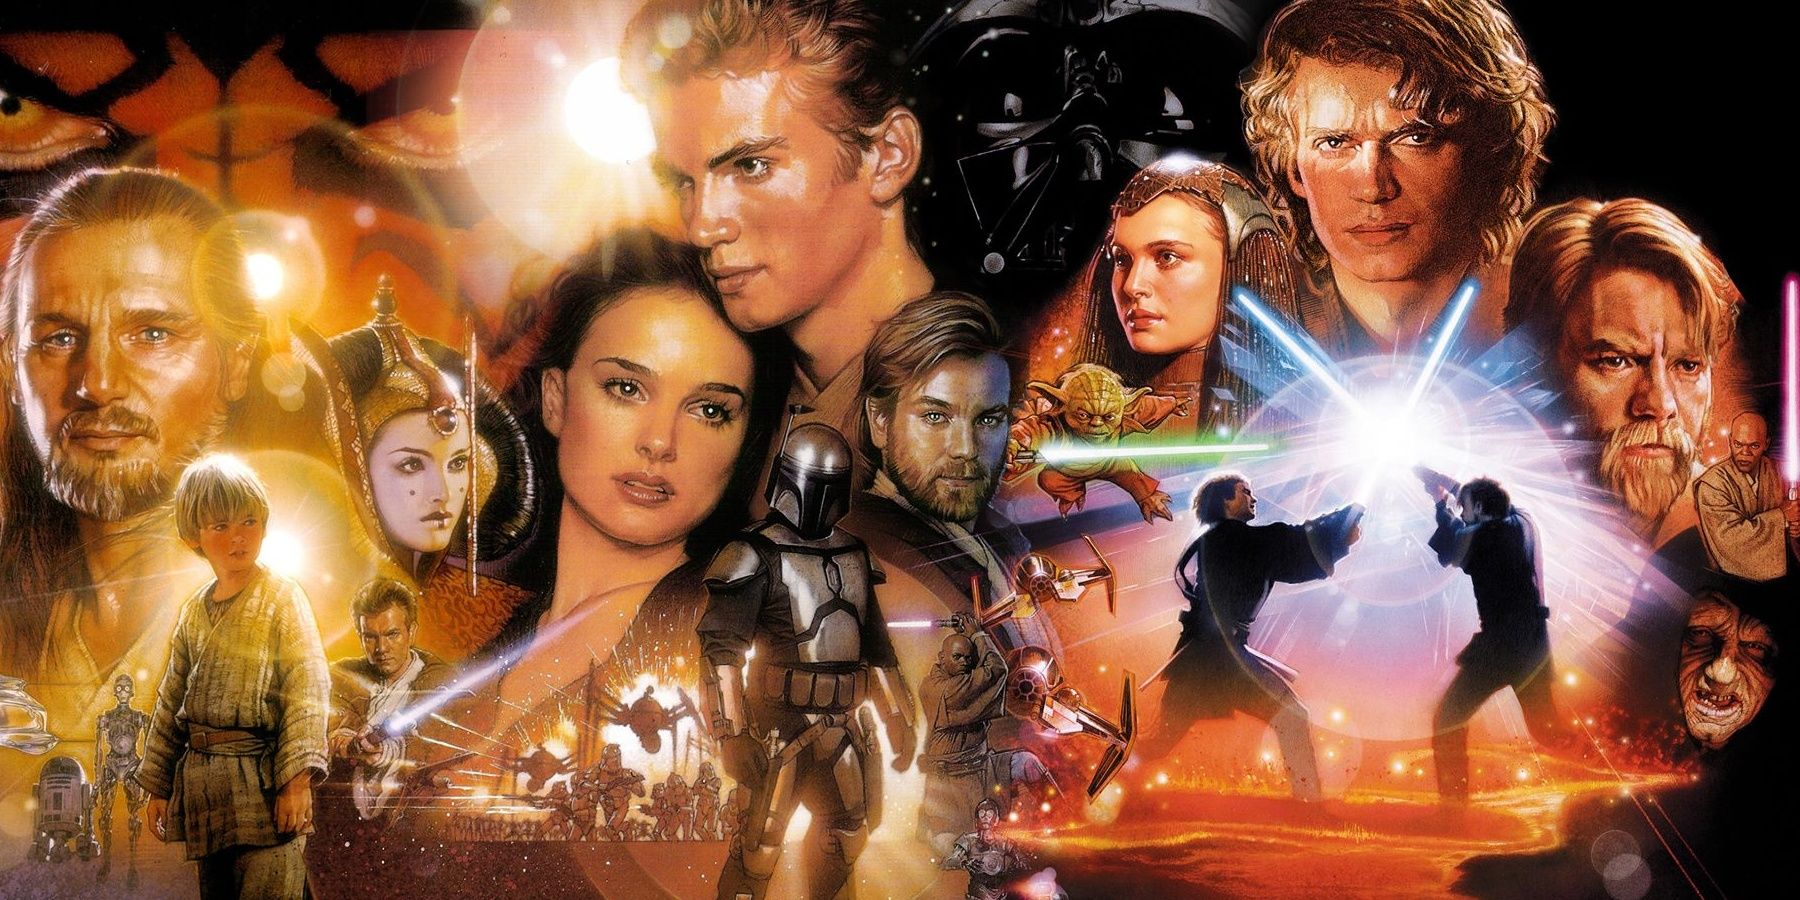 An amalgam of the cover arts for the Star Wars prequel trilogy